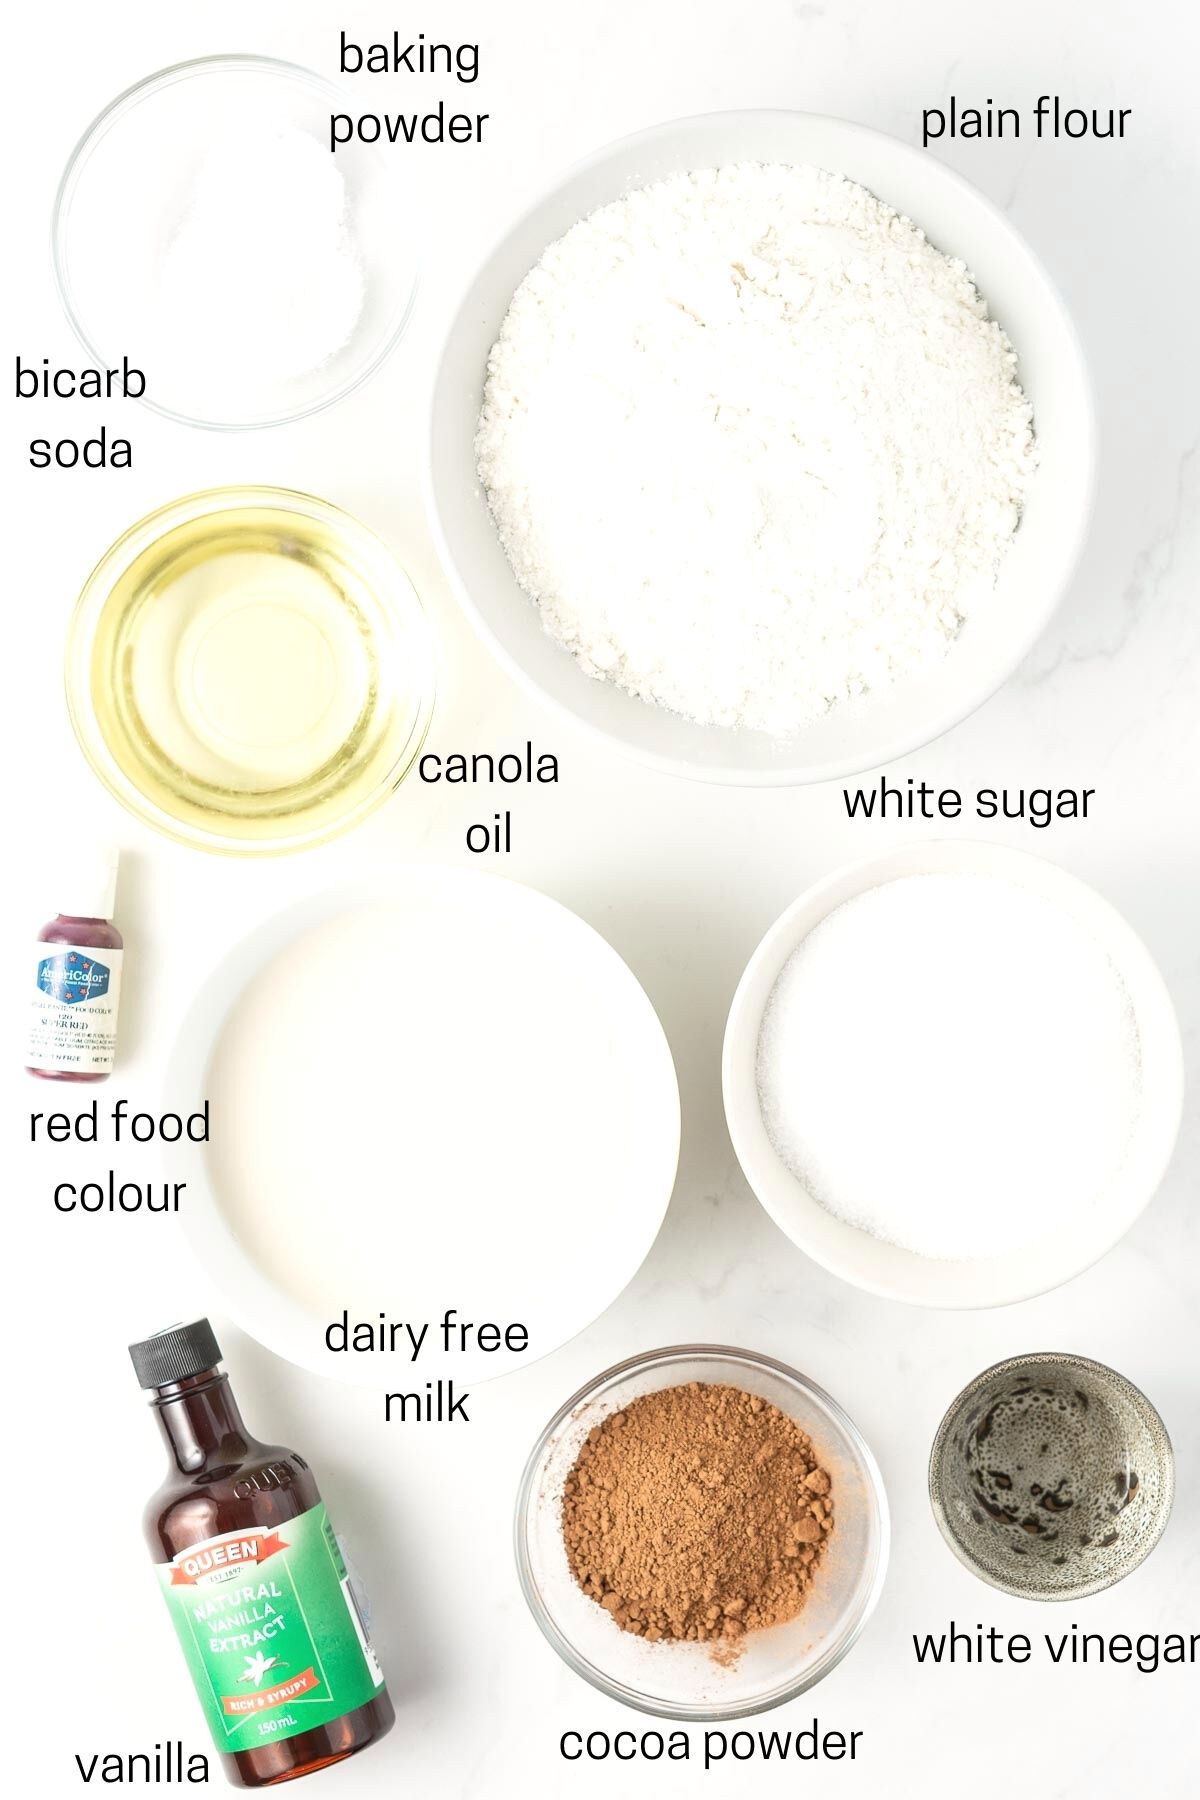 All ingredients needed to make red velvet cake laid out in small bowls.